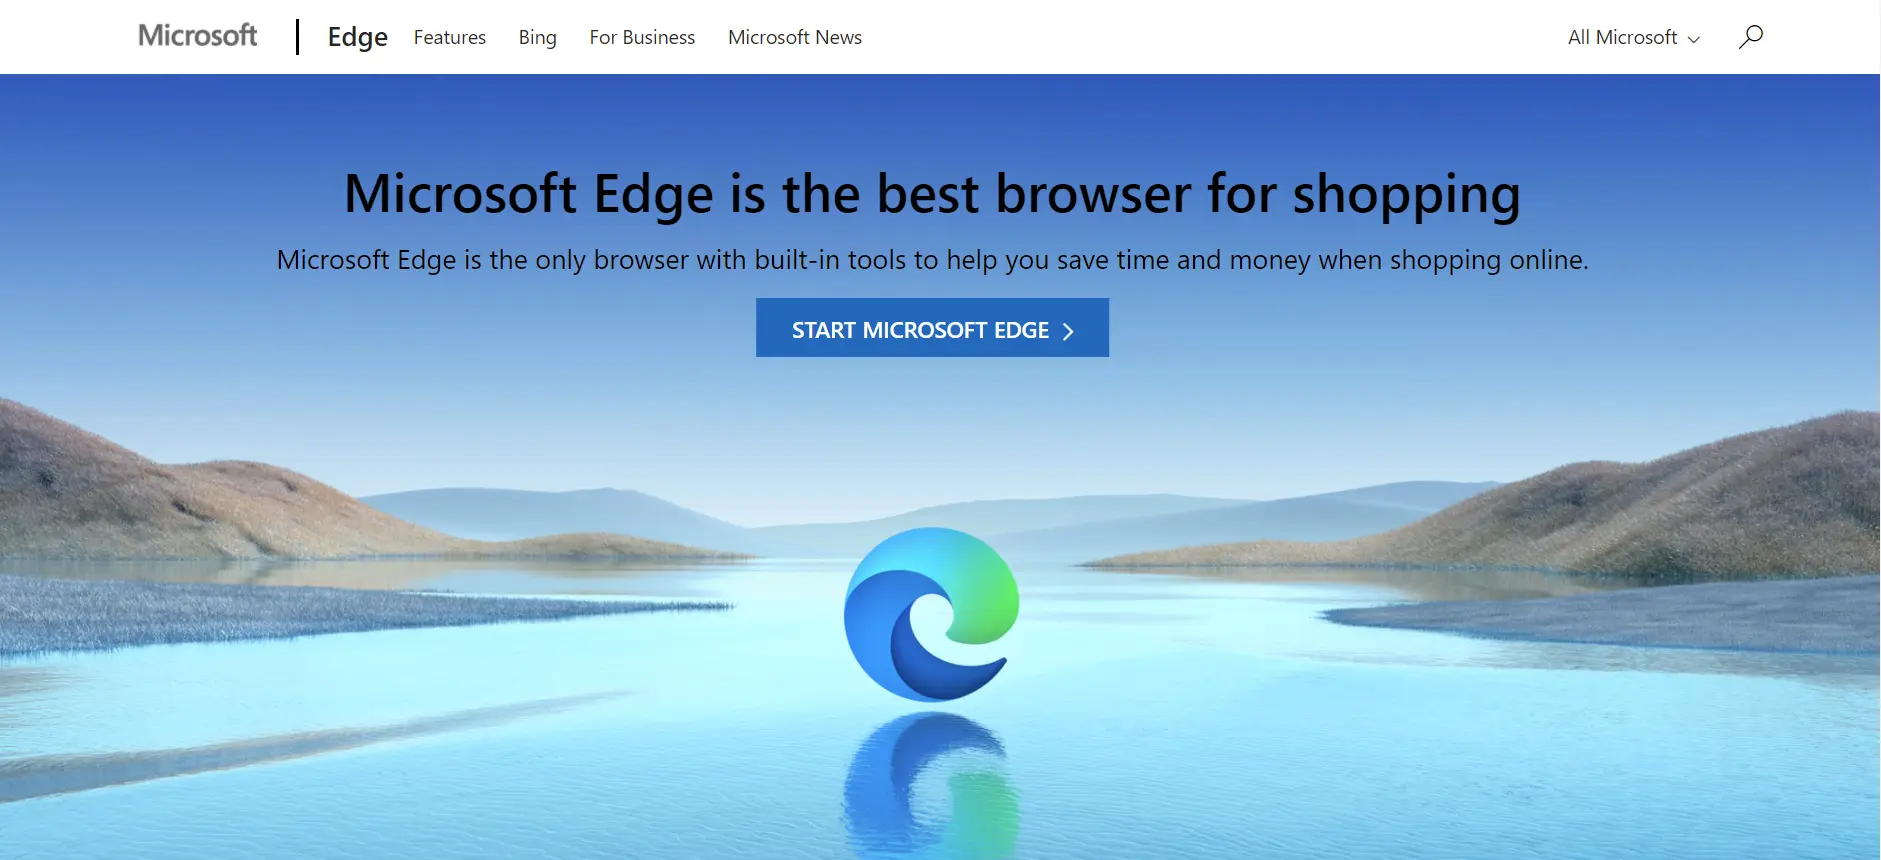 Getting started with the Microsoft Edge browser